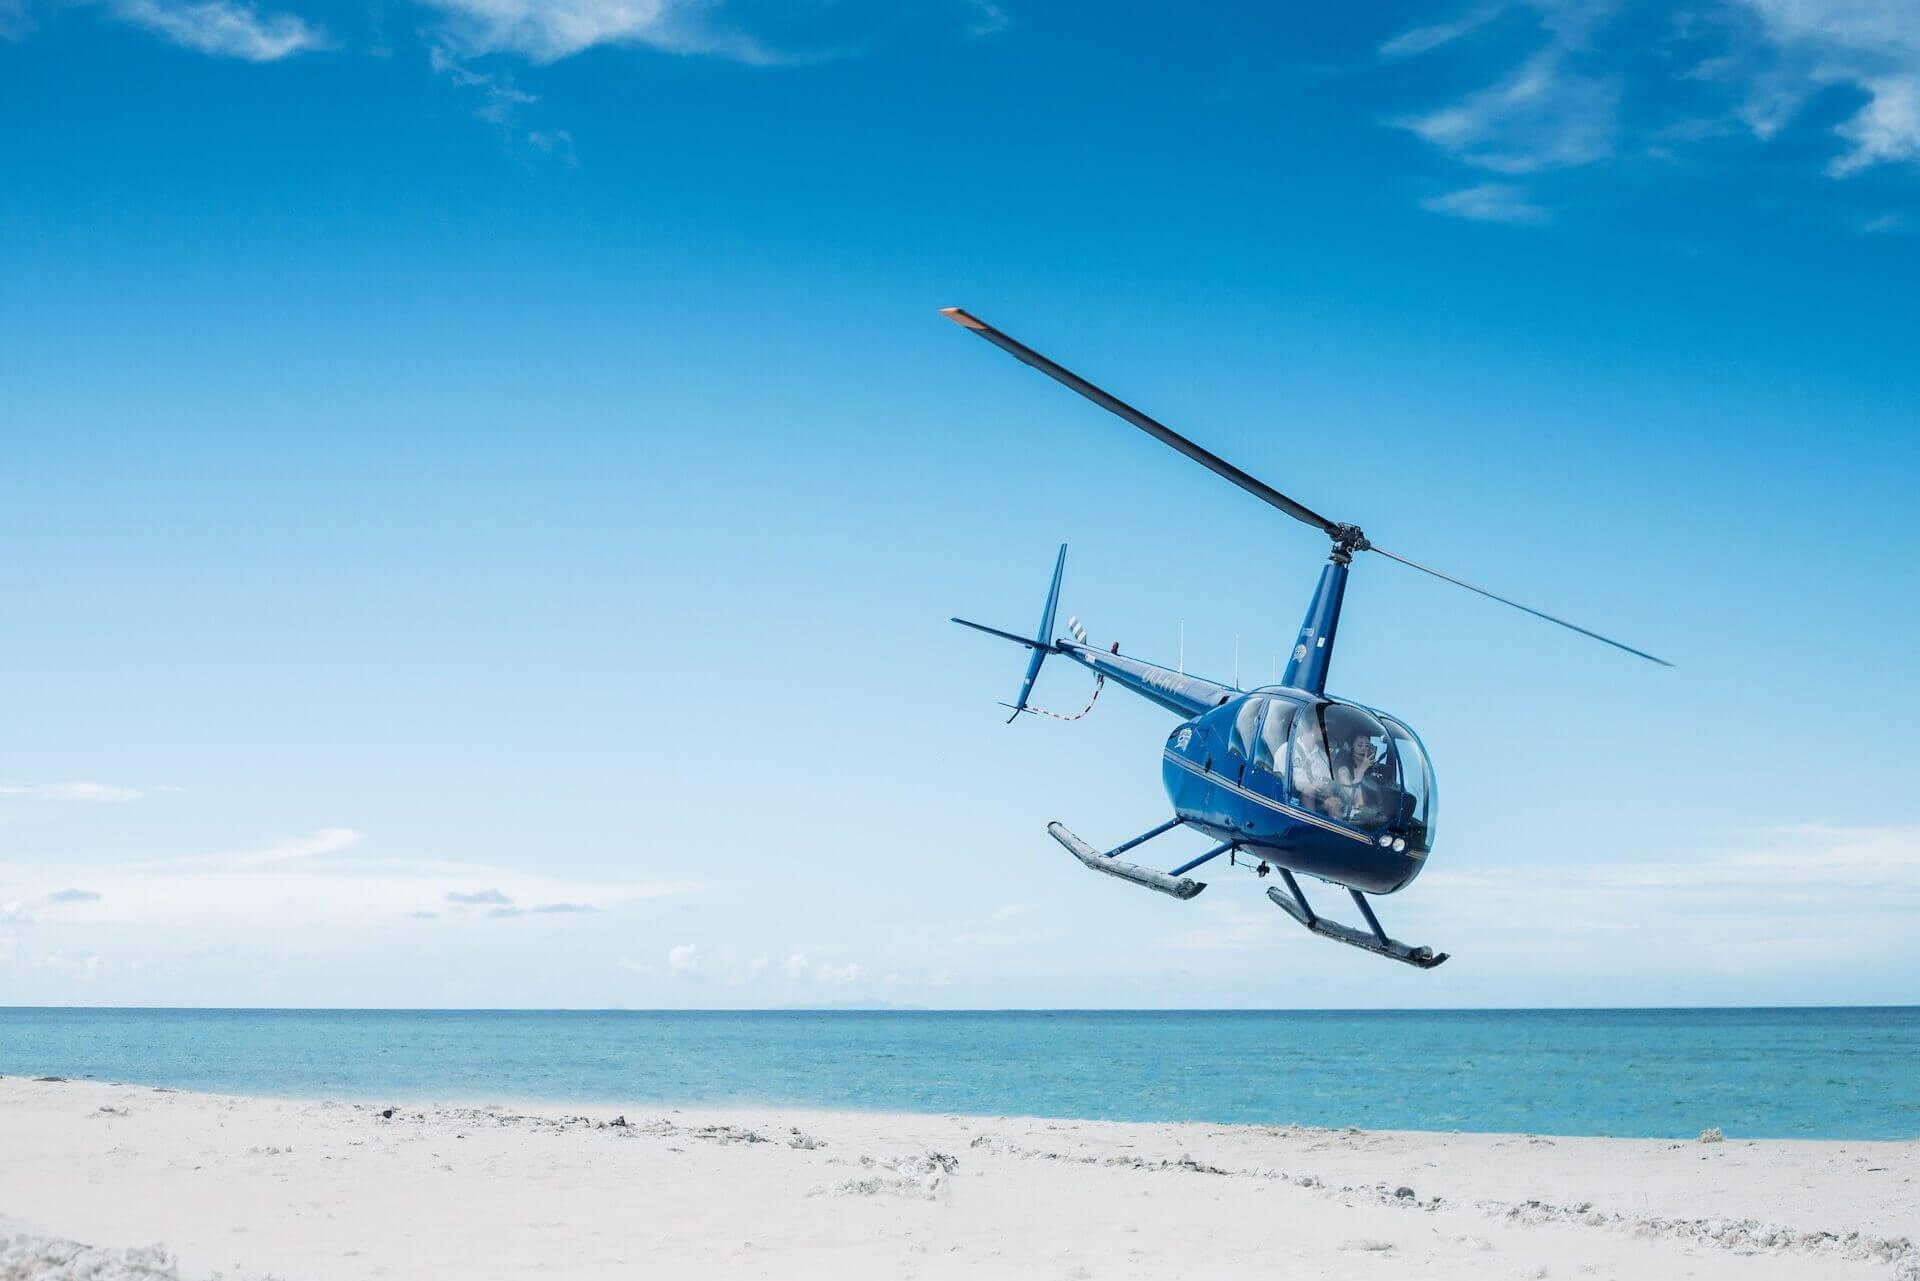 Helicopter landing on a sandy beach